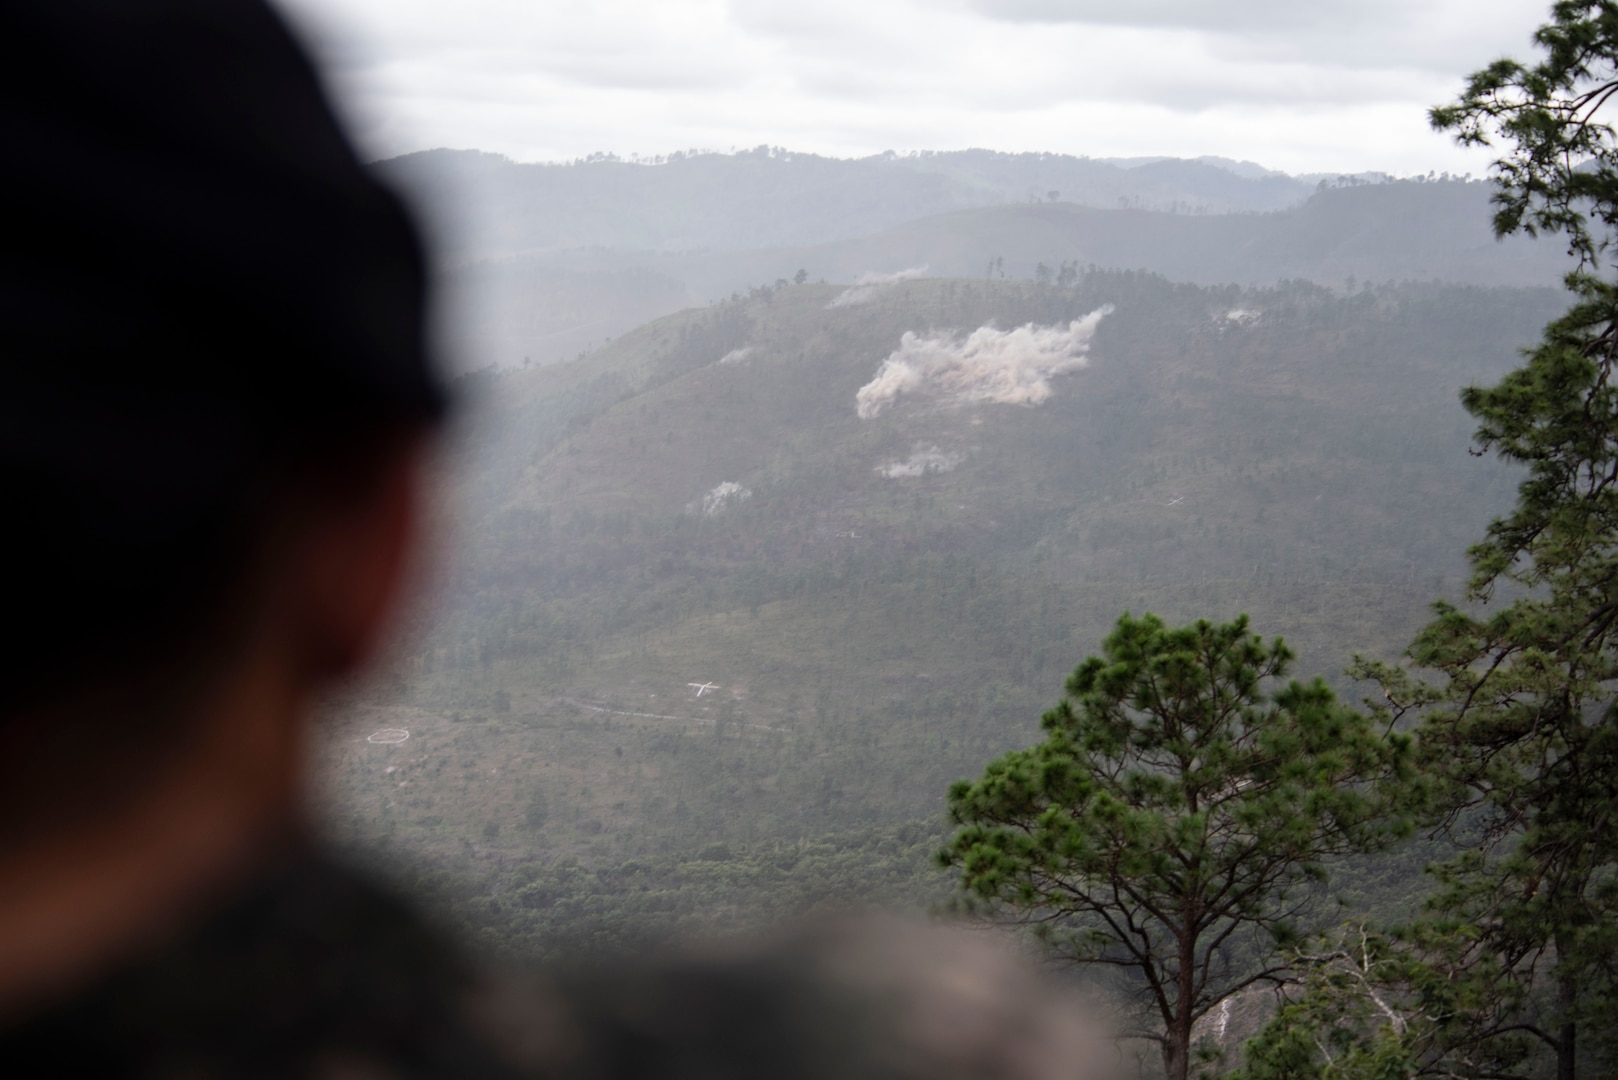 A Honduran soldier watches a demonstration during Artillery Day at Zambrano, Dec. 4, 2018.